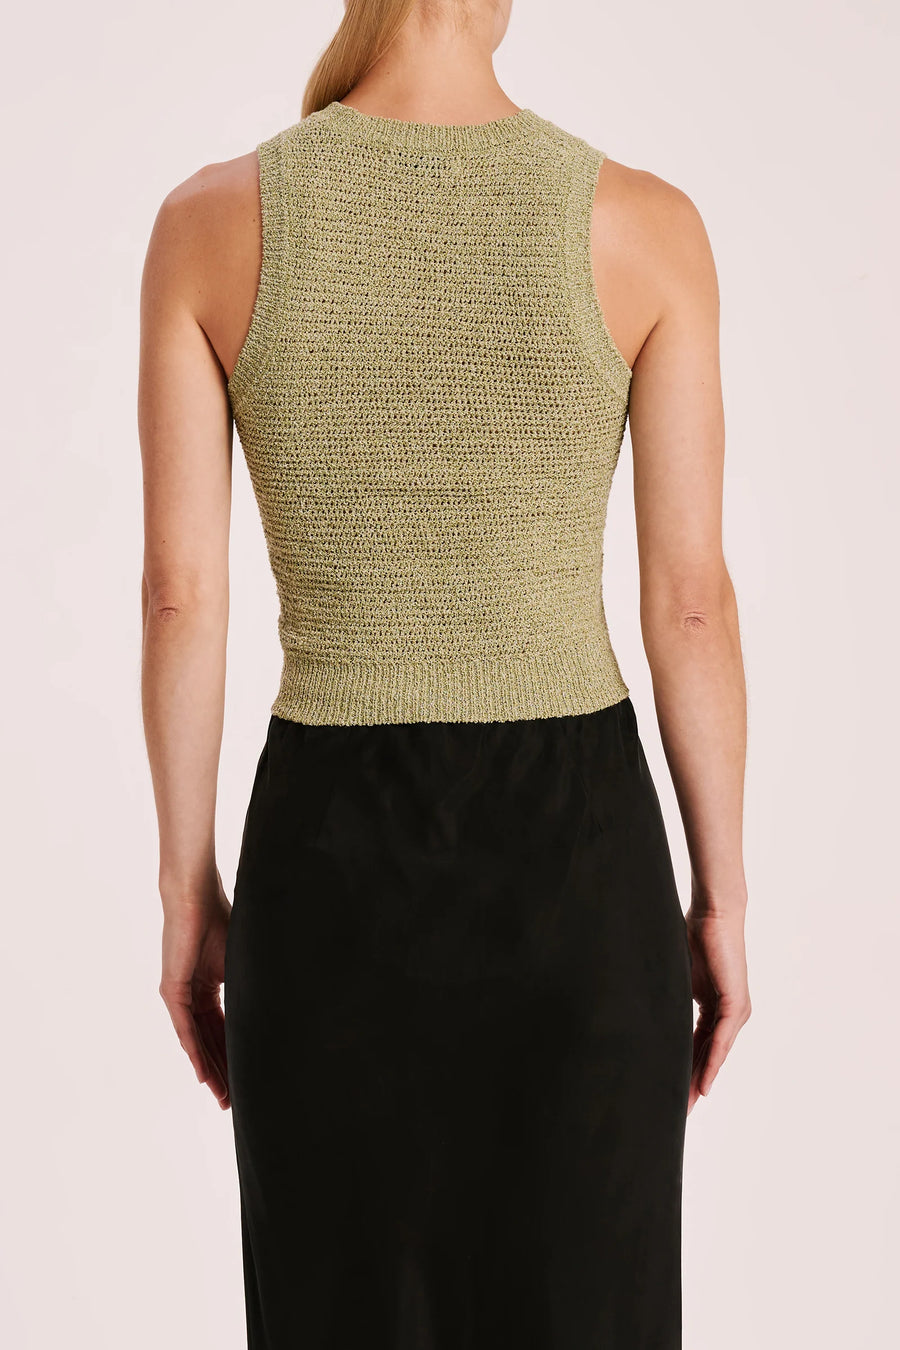 Ember Knit Tank in Lime